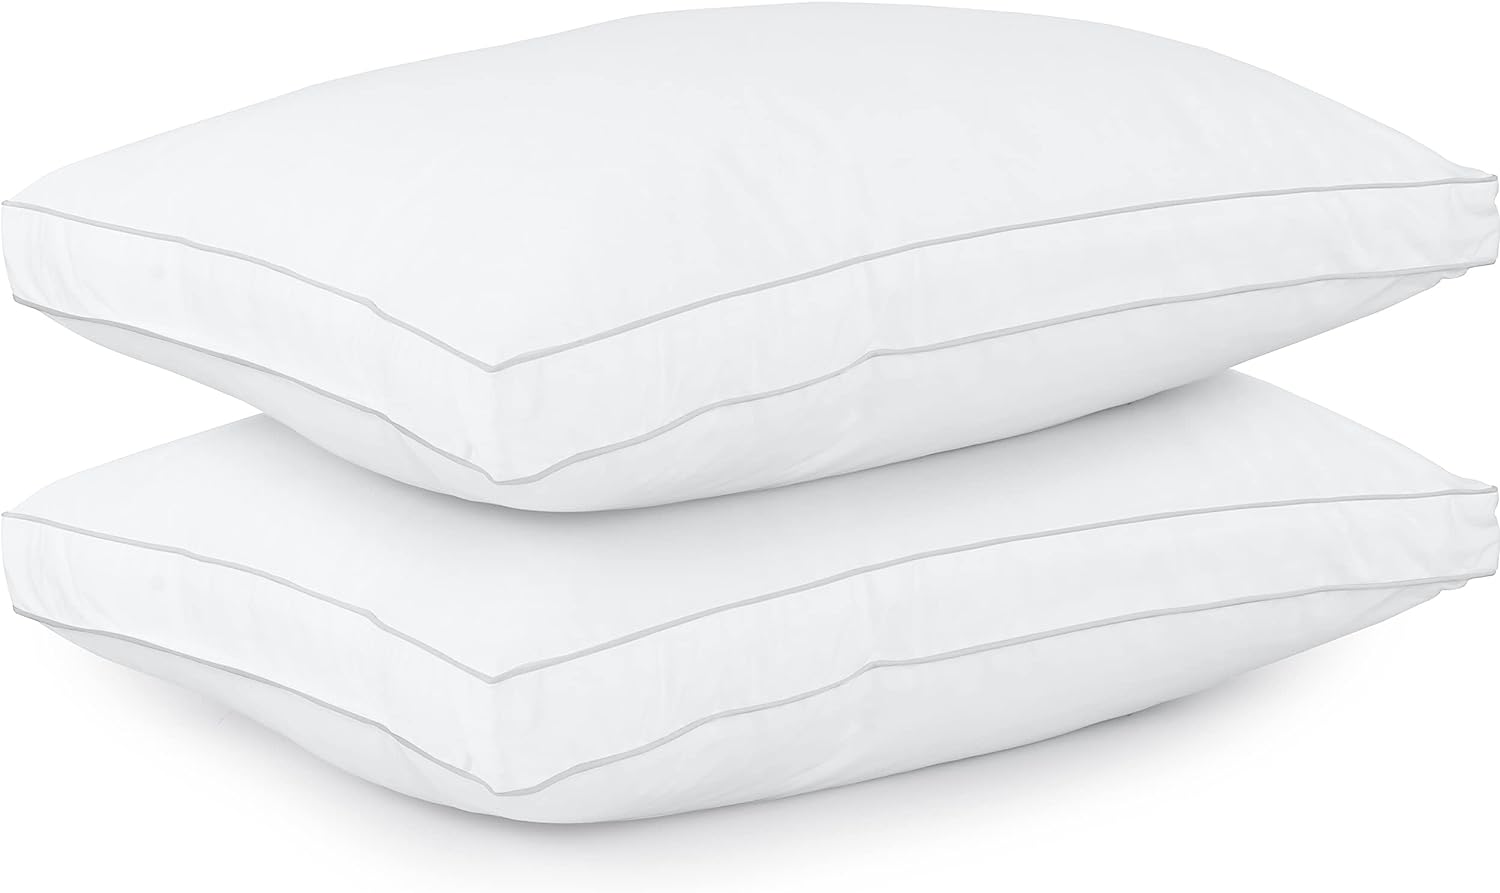 Utopia Bedding Bed Pillows for Sleeping Queen Size (White), Set of 2,  Cooling Hotel Quality, Gusseted